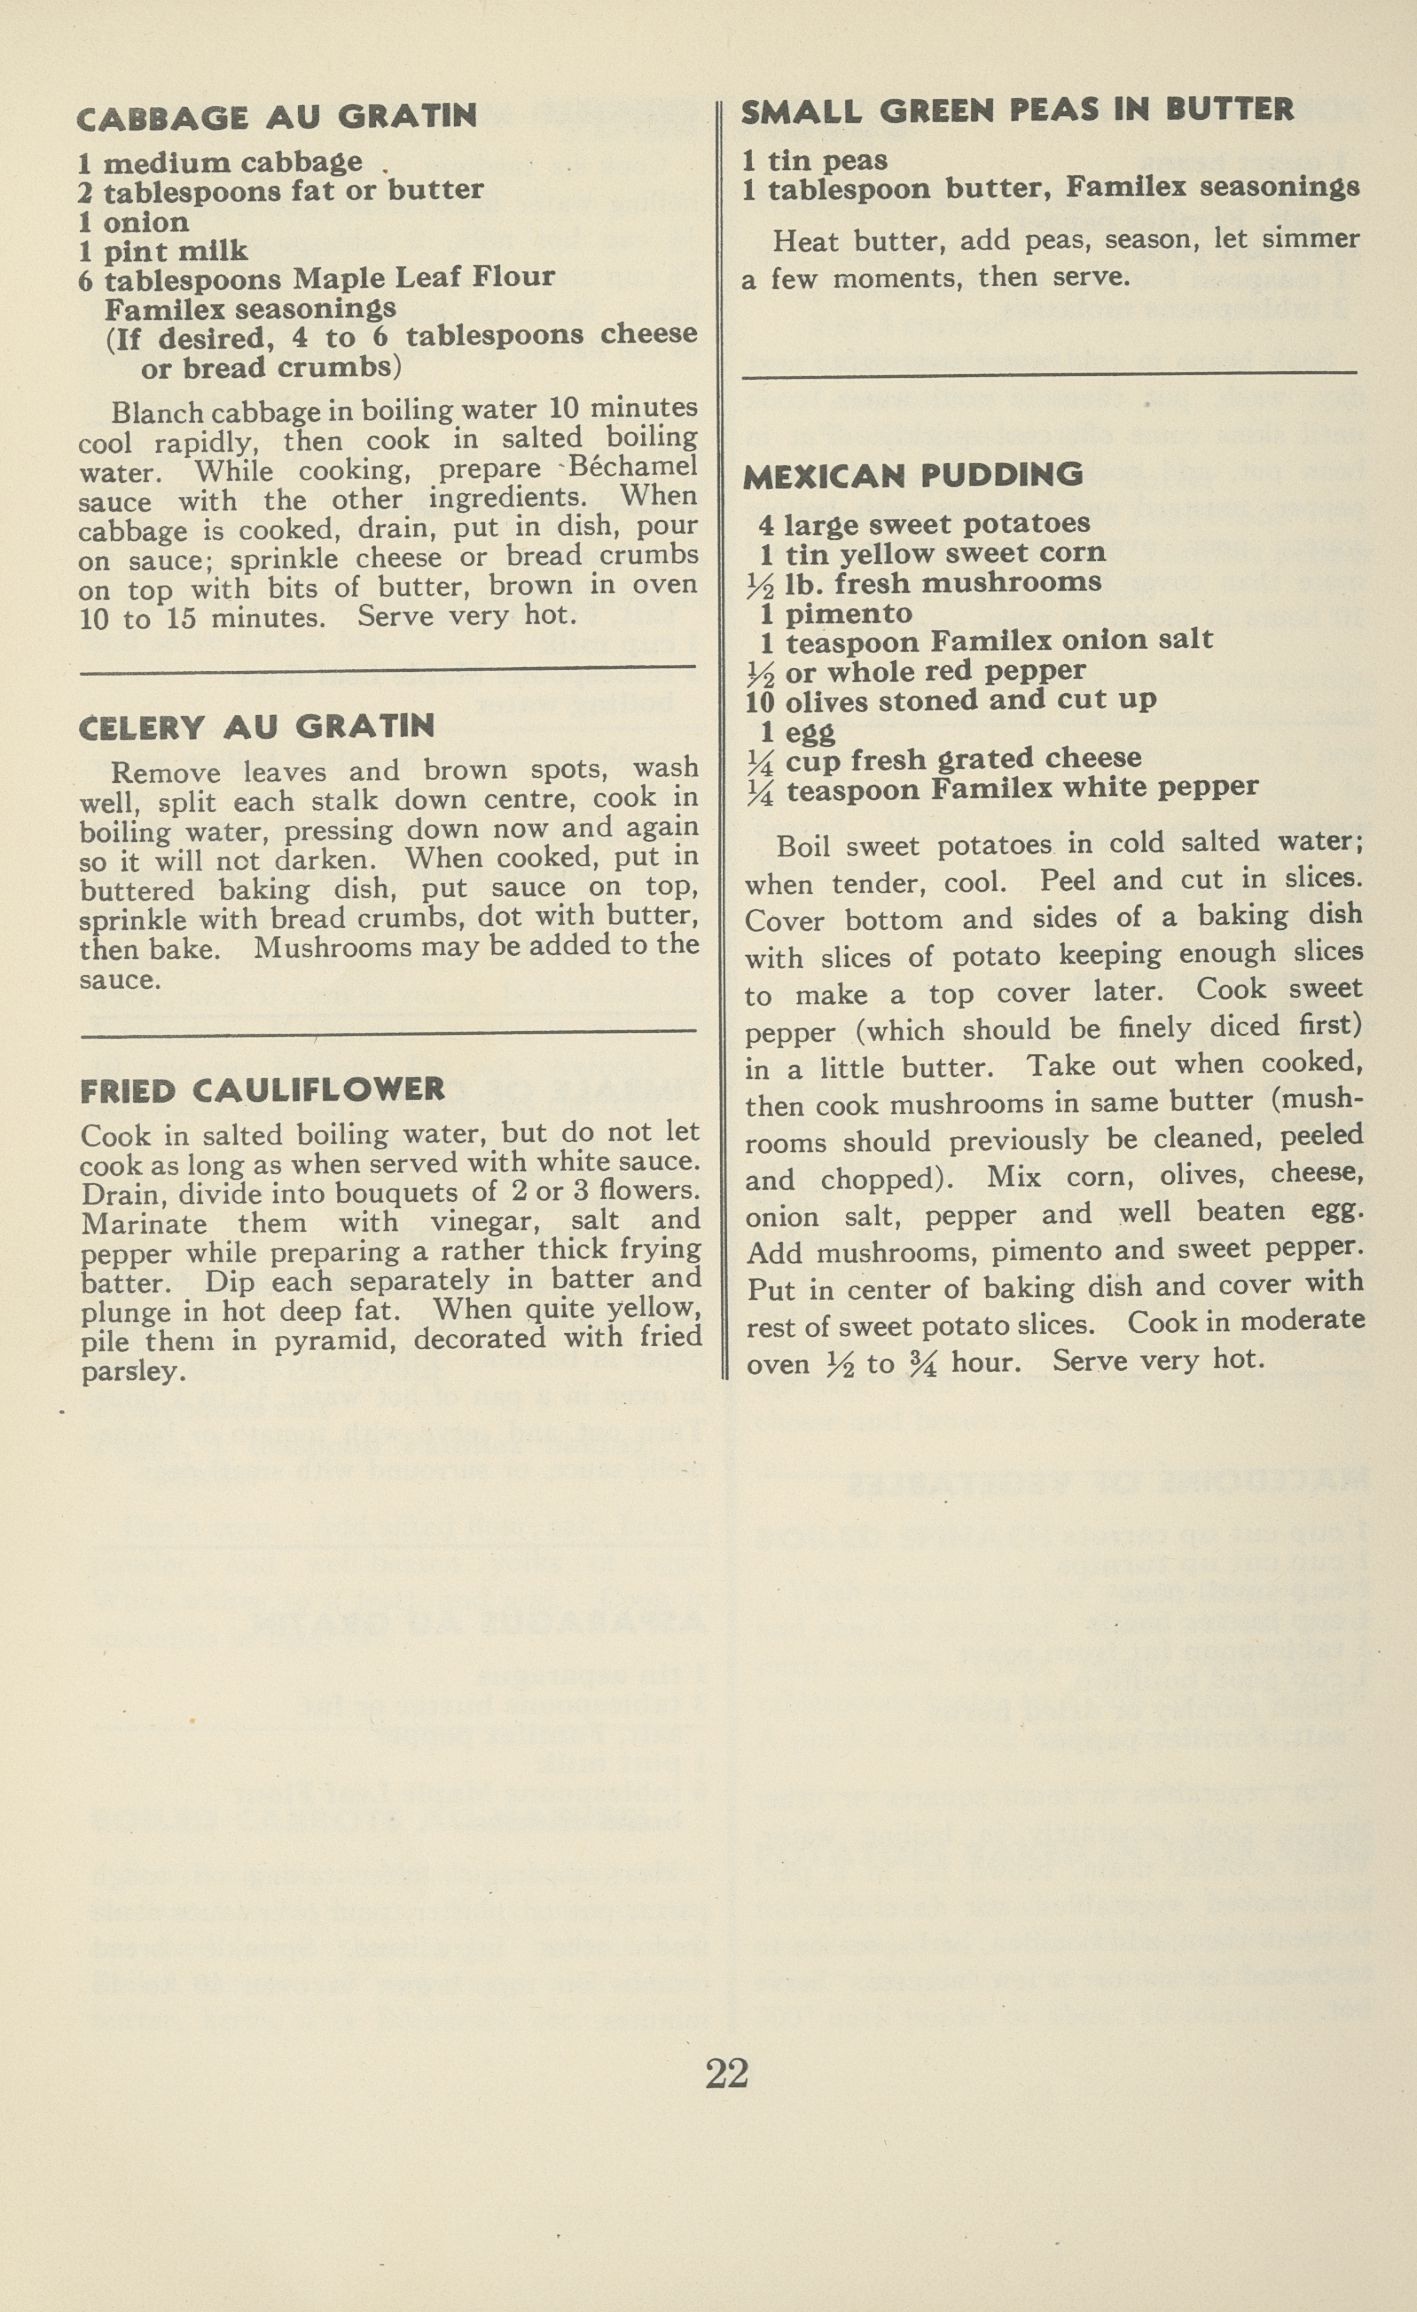 Scanned copy of recipe for Mexican Pudding